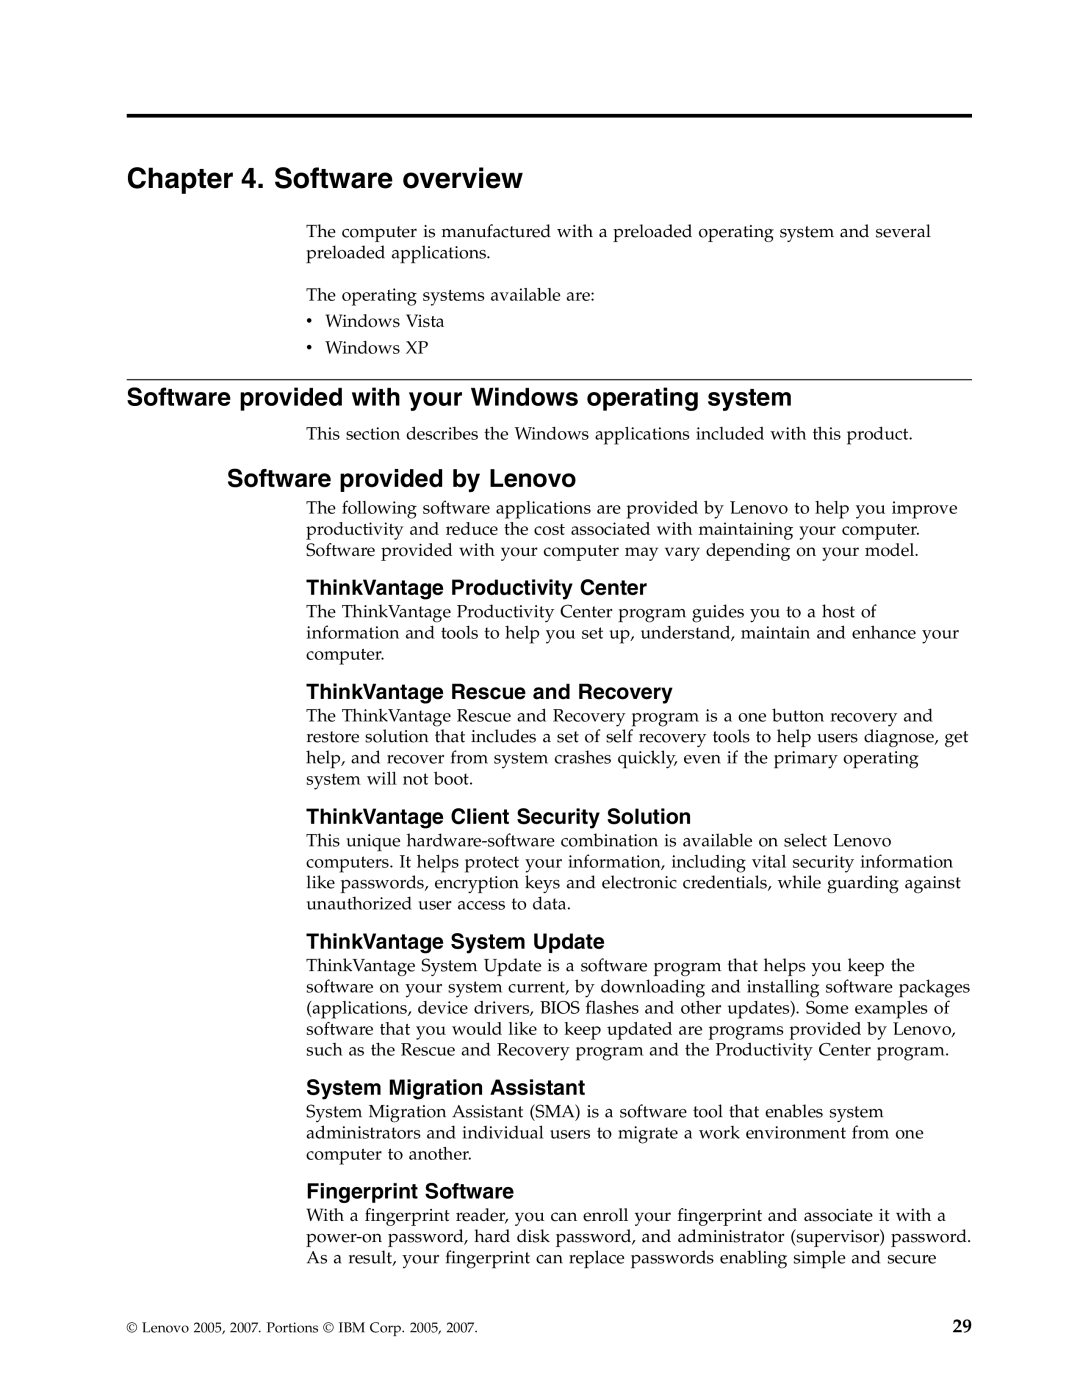 Lenovo 6008 Software overview, Software provided by Lenovo, ThinkVantage Productivity Center, ThinkVantage System Update 